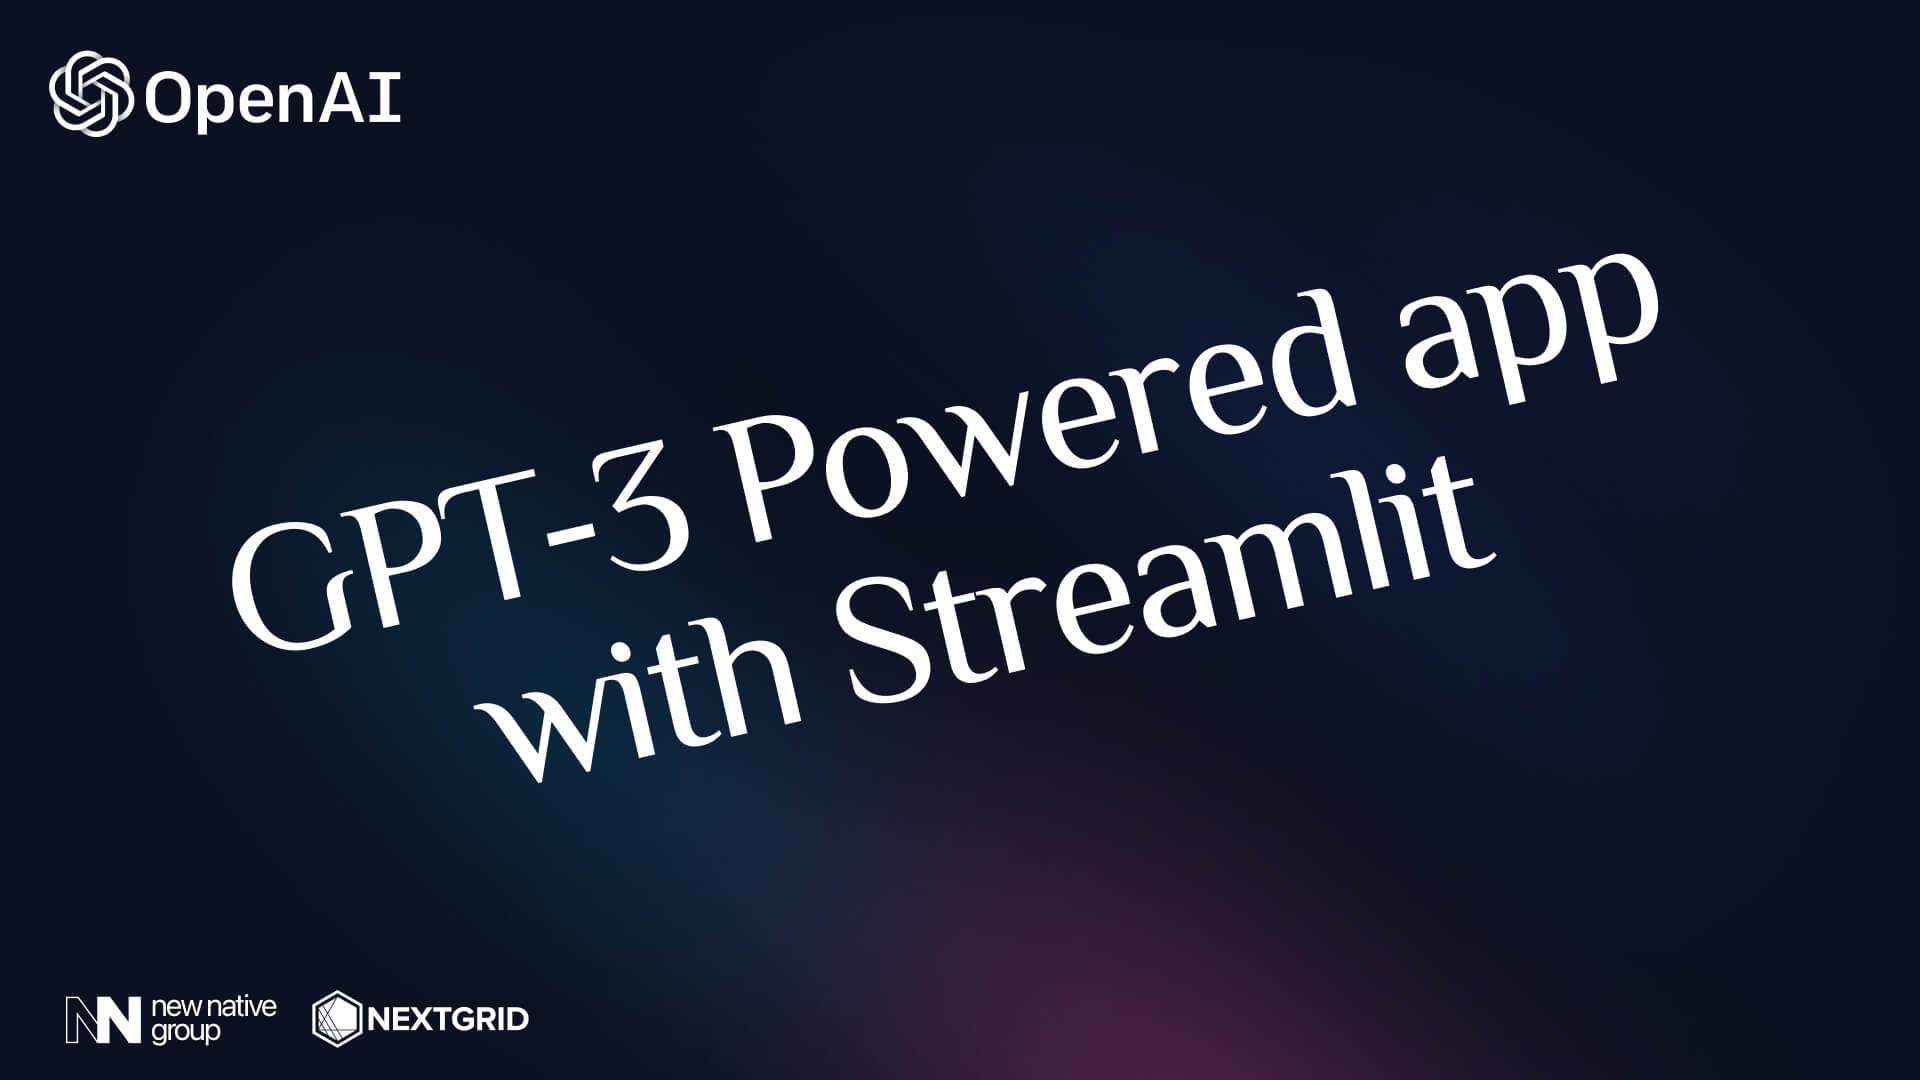 Build your own GPT-3 Powered application using streamlit